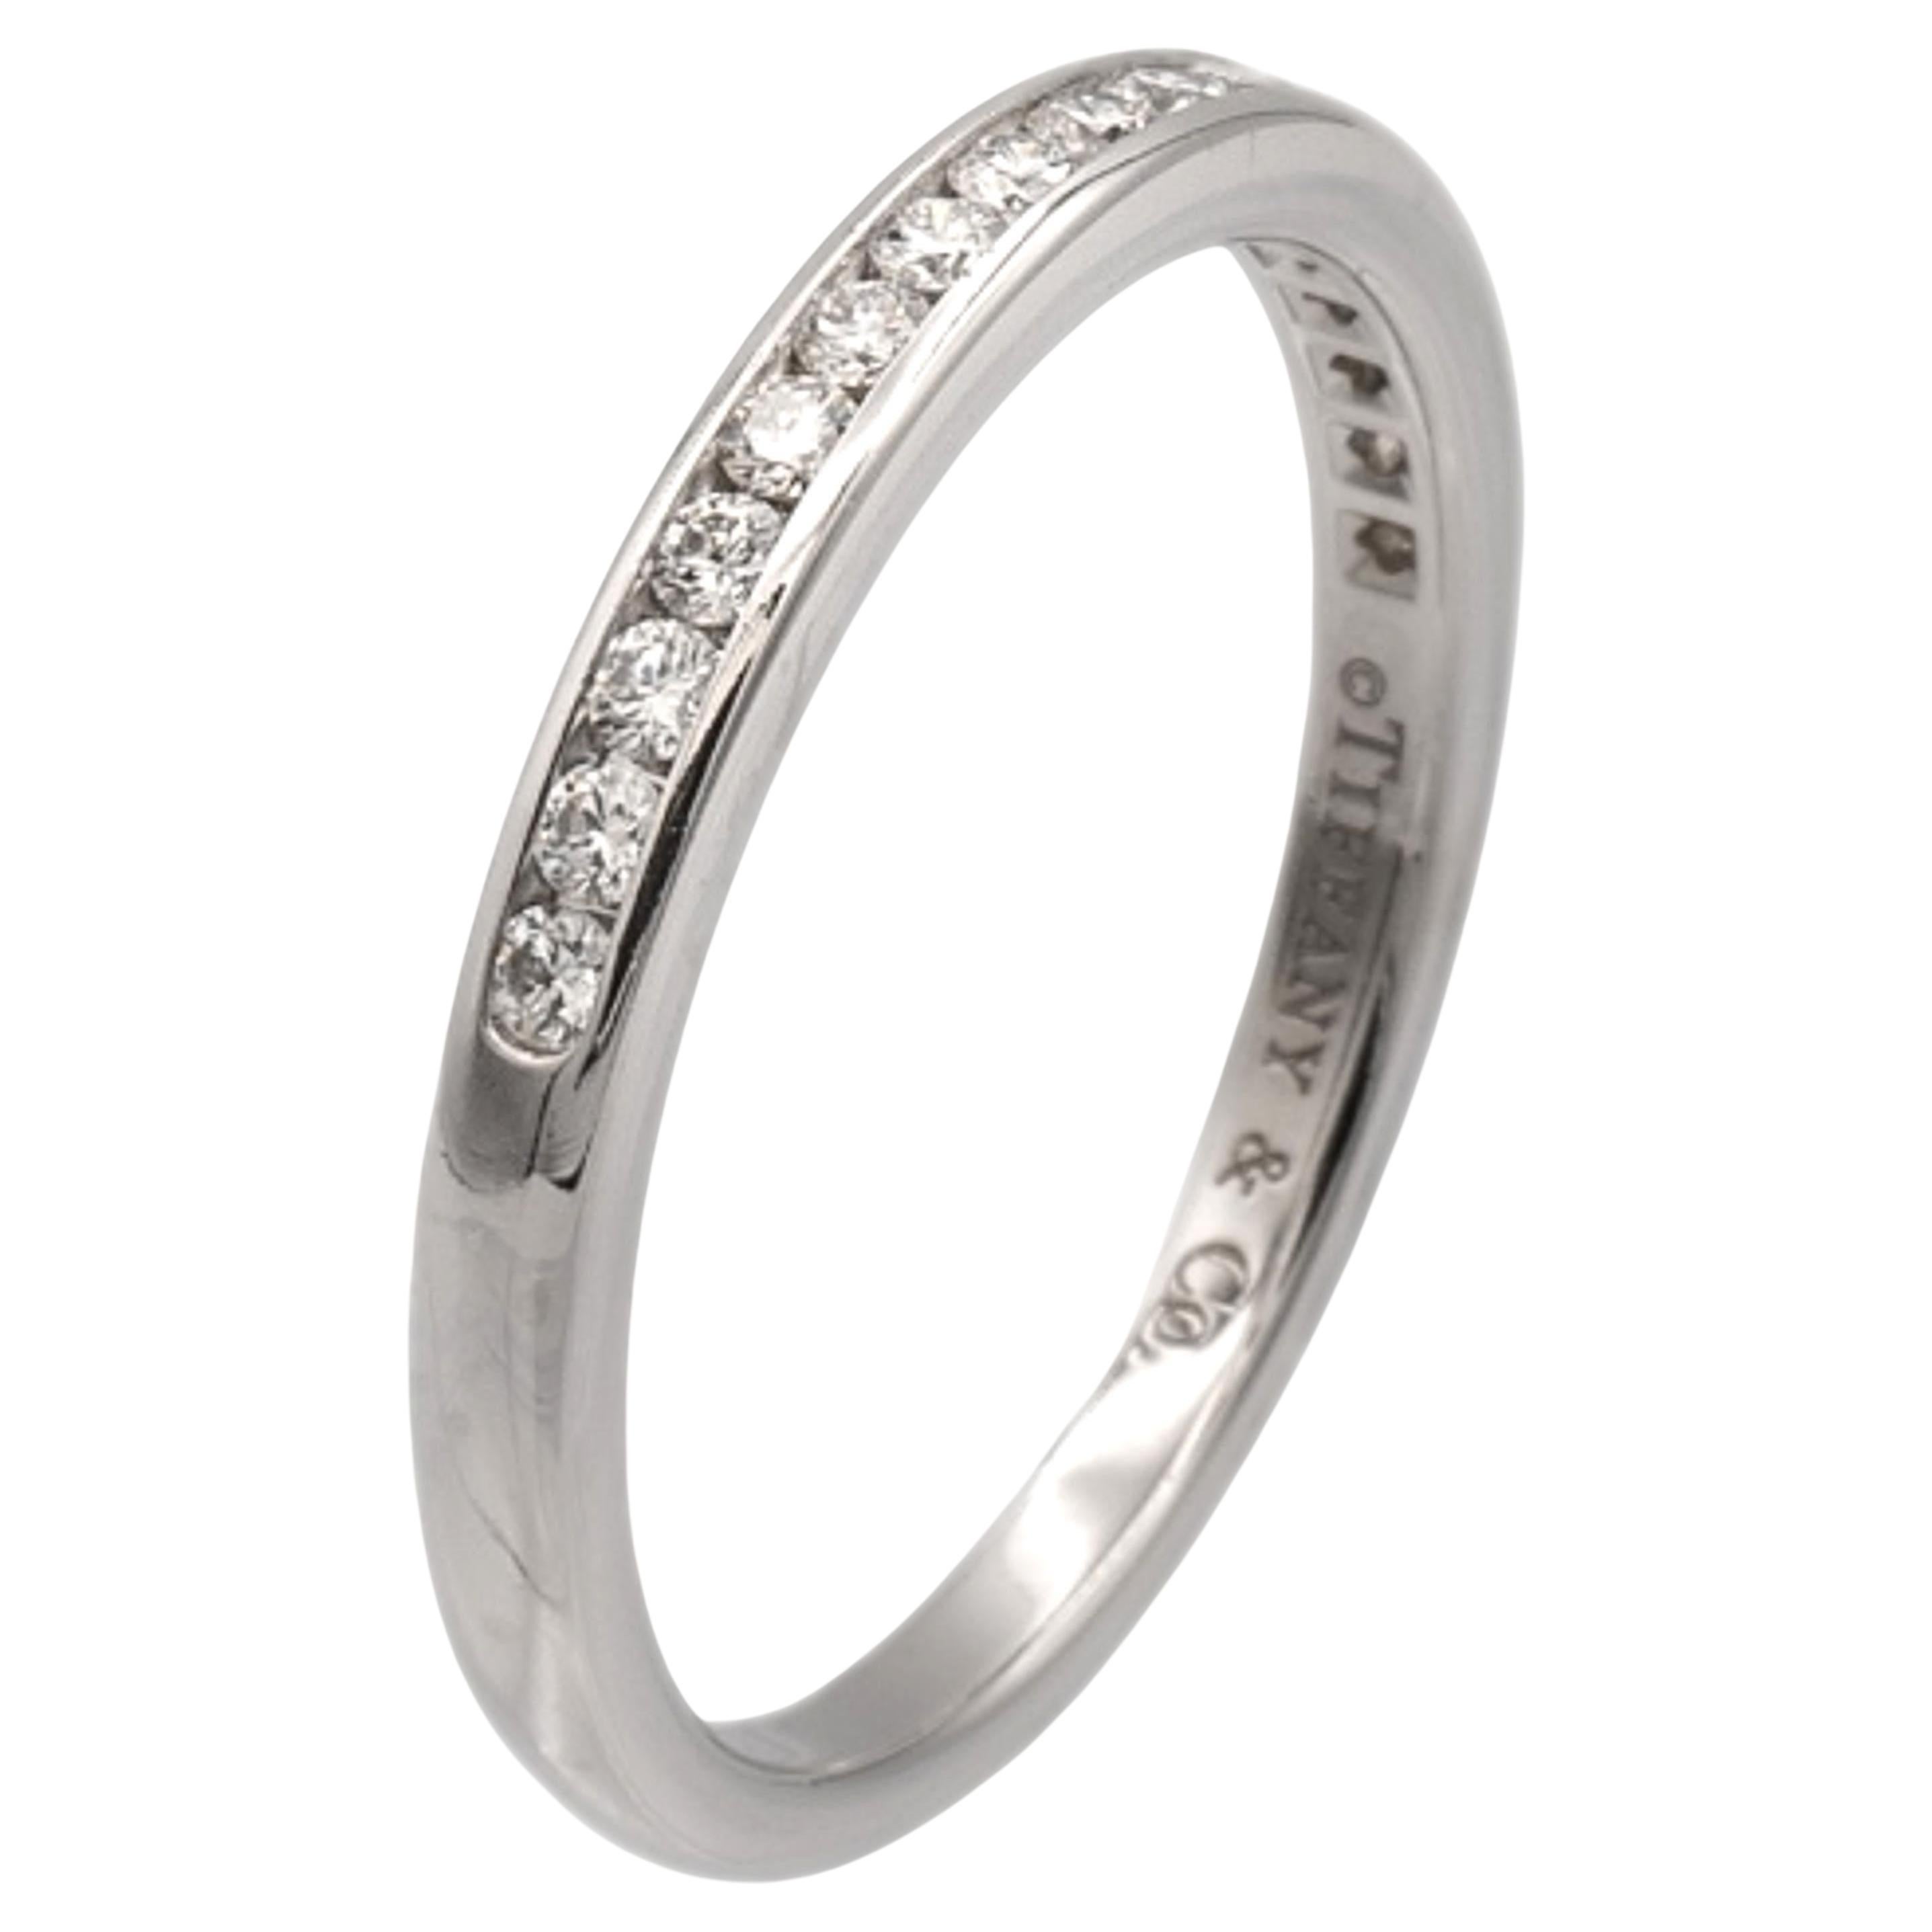 Tiffany & Co Platinum Half Circle Eternity Band Ring .17ct 2 mm Size 6.5 For Sale